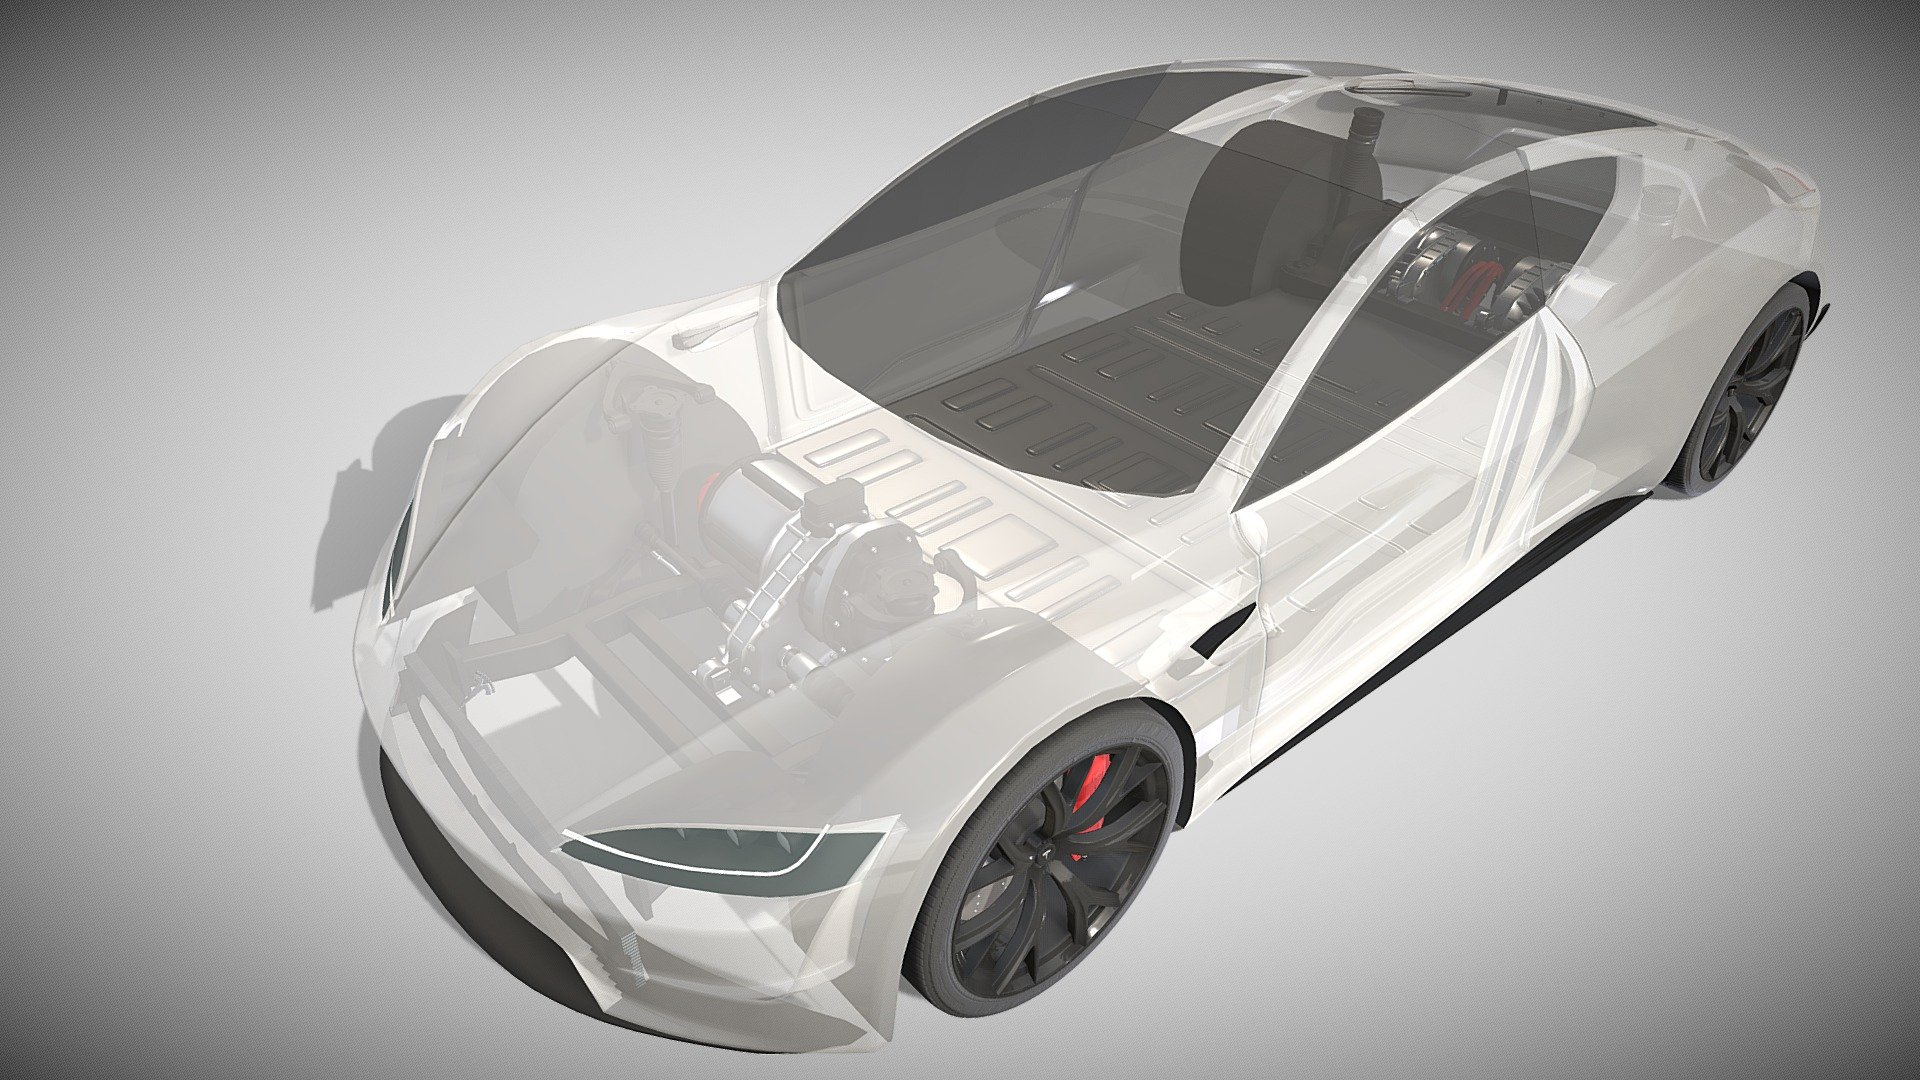 Tesla Roadster with full chassis (battery pack, 3 motor setup, brakes, linkages, suspension, steering) 3d model rendered with Cycles in Blender, as per seen on attached images.

File formats:
-.blend, rendered with cycles, as seen in the images;
-.blend, rendered with cycles, with a see-through of the chassis, as seen in the images;
-.obj, with materials applied;
-.dae, with materials applied;
-.fbx, with material slots applied;
-.stl;

Files come named appropriately and split by file format.

3D Software:
The 3D model was originally created in to Blender 2.79 and rendered with Cycles.

Materials and textures:
The models have materials applied in all formats, and are ready to import and render.
The models come with no image textures as everything is material based 3d model